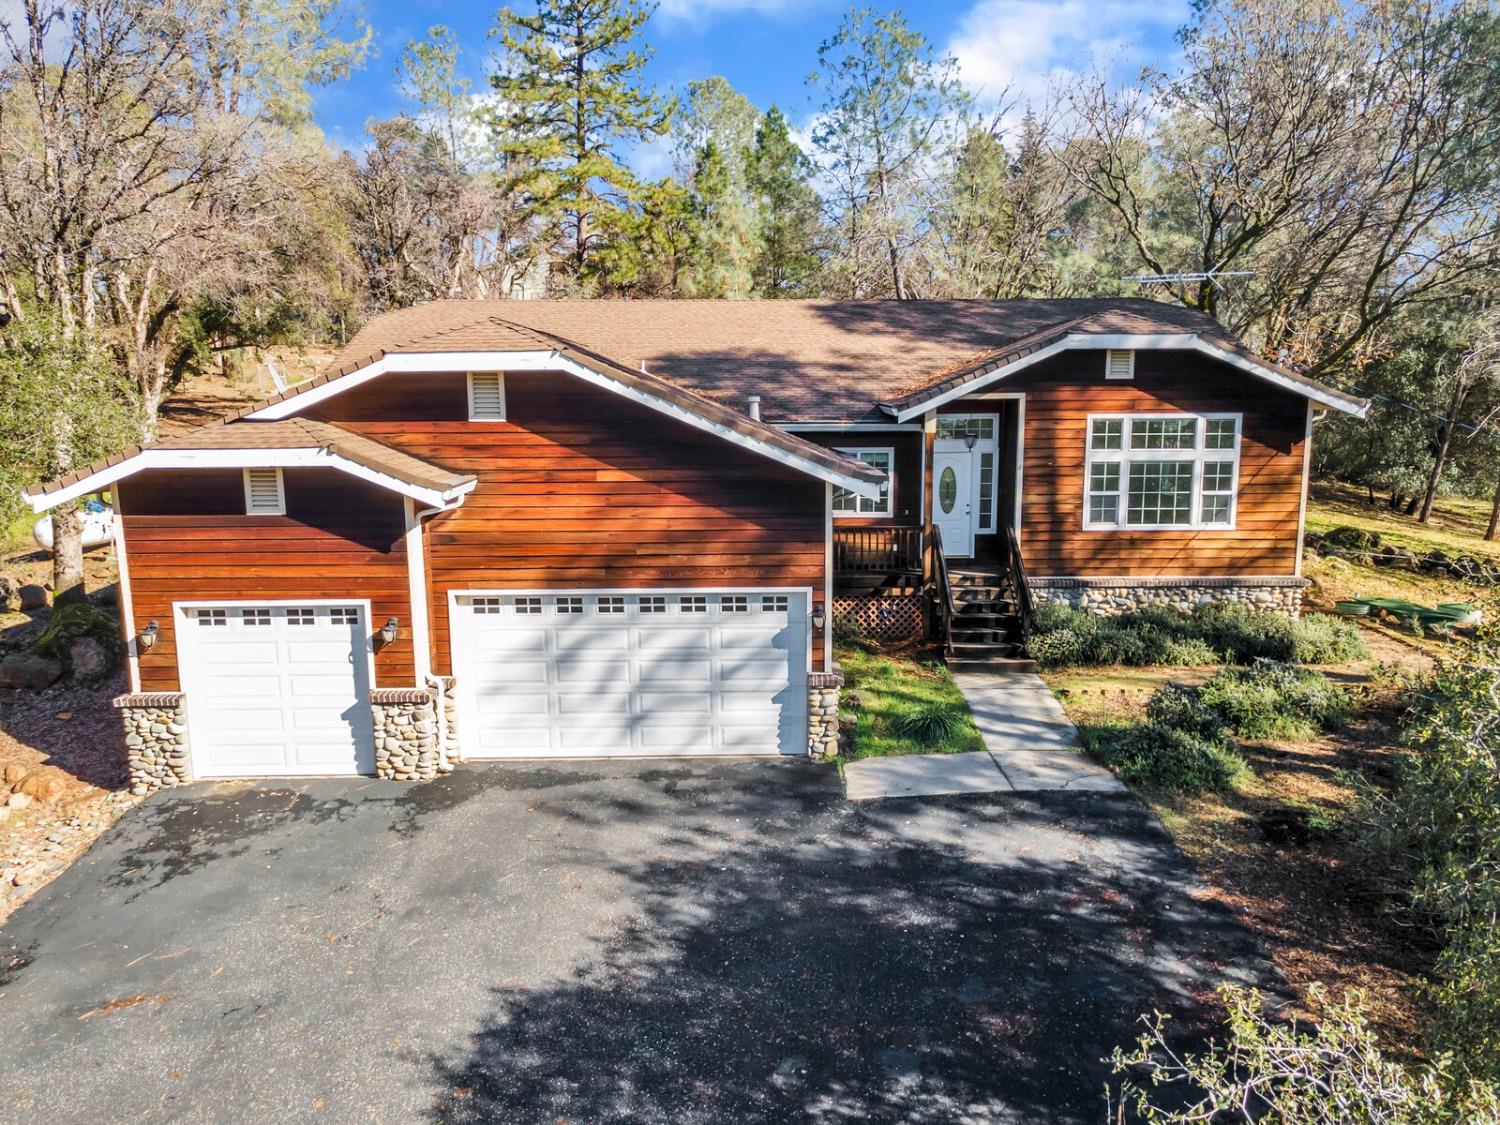 Photo of 17667 Aileen Wy in Grass Valley, CA